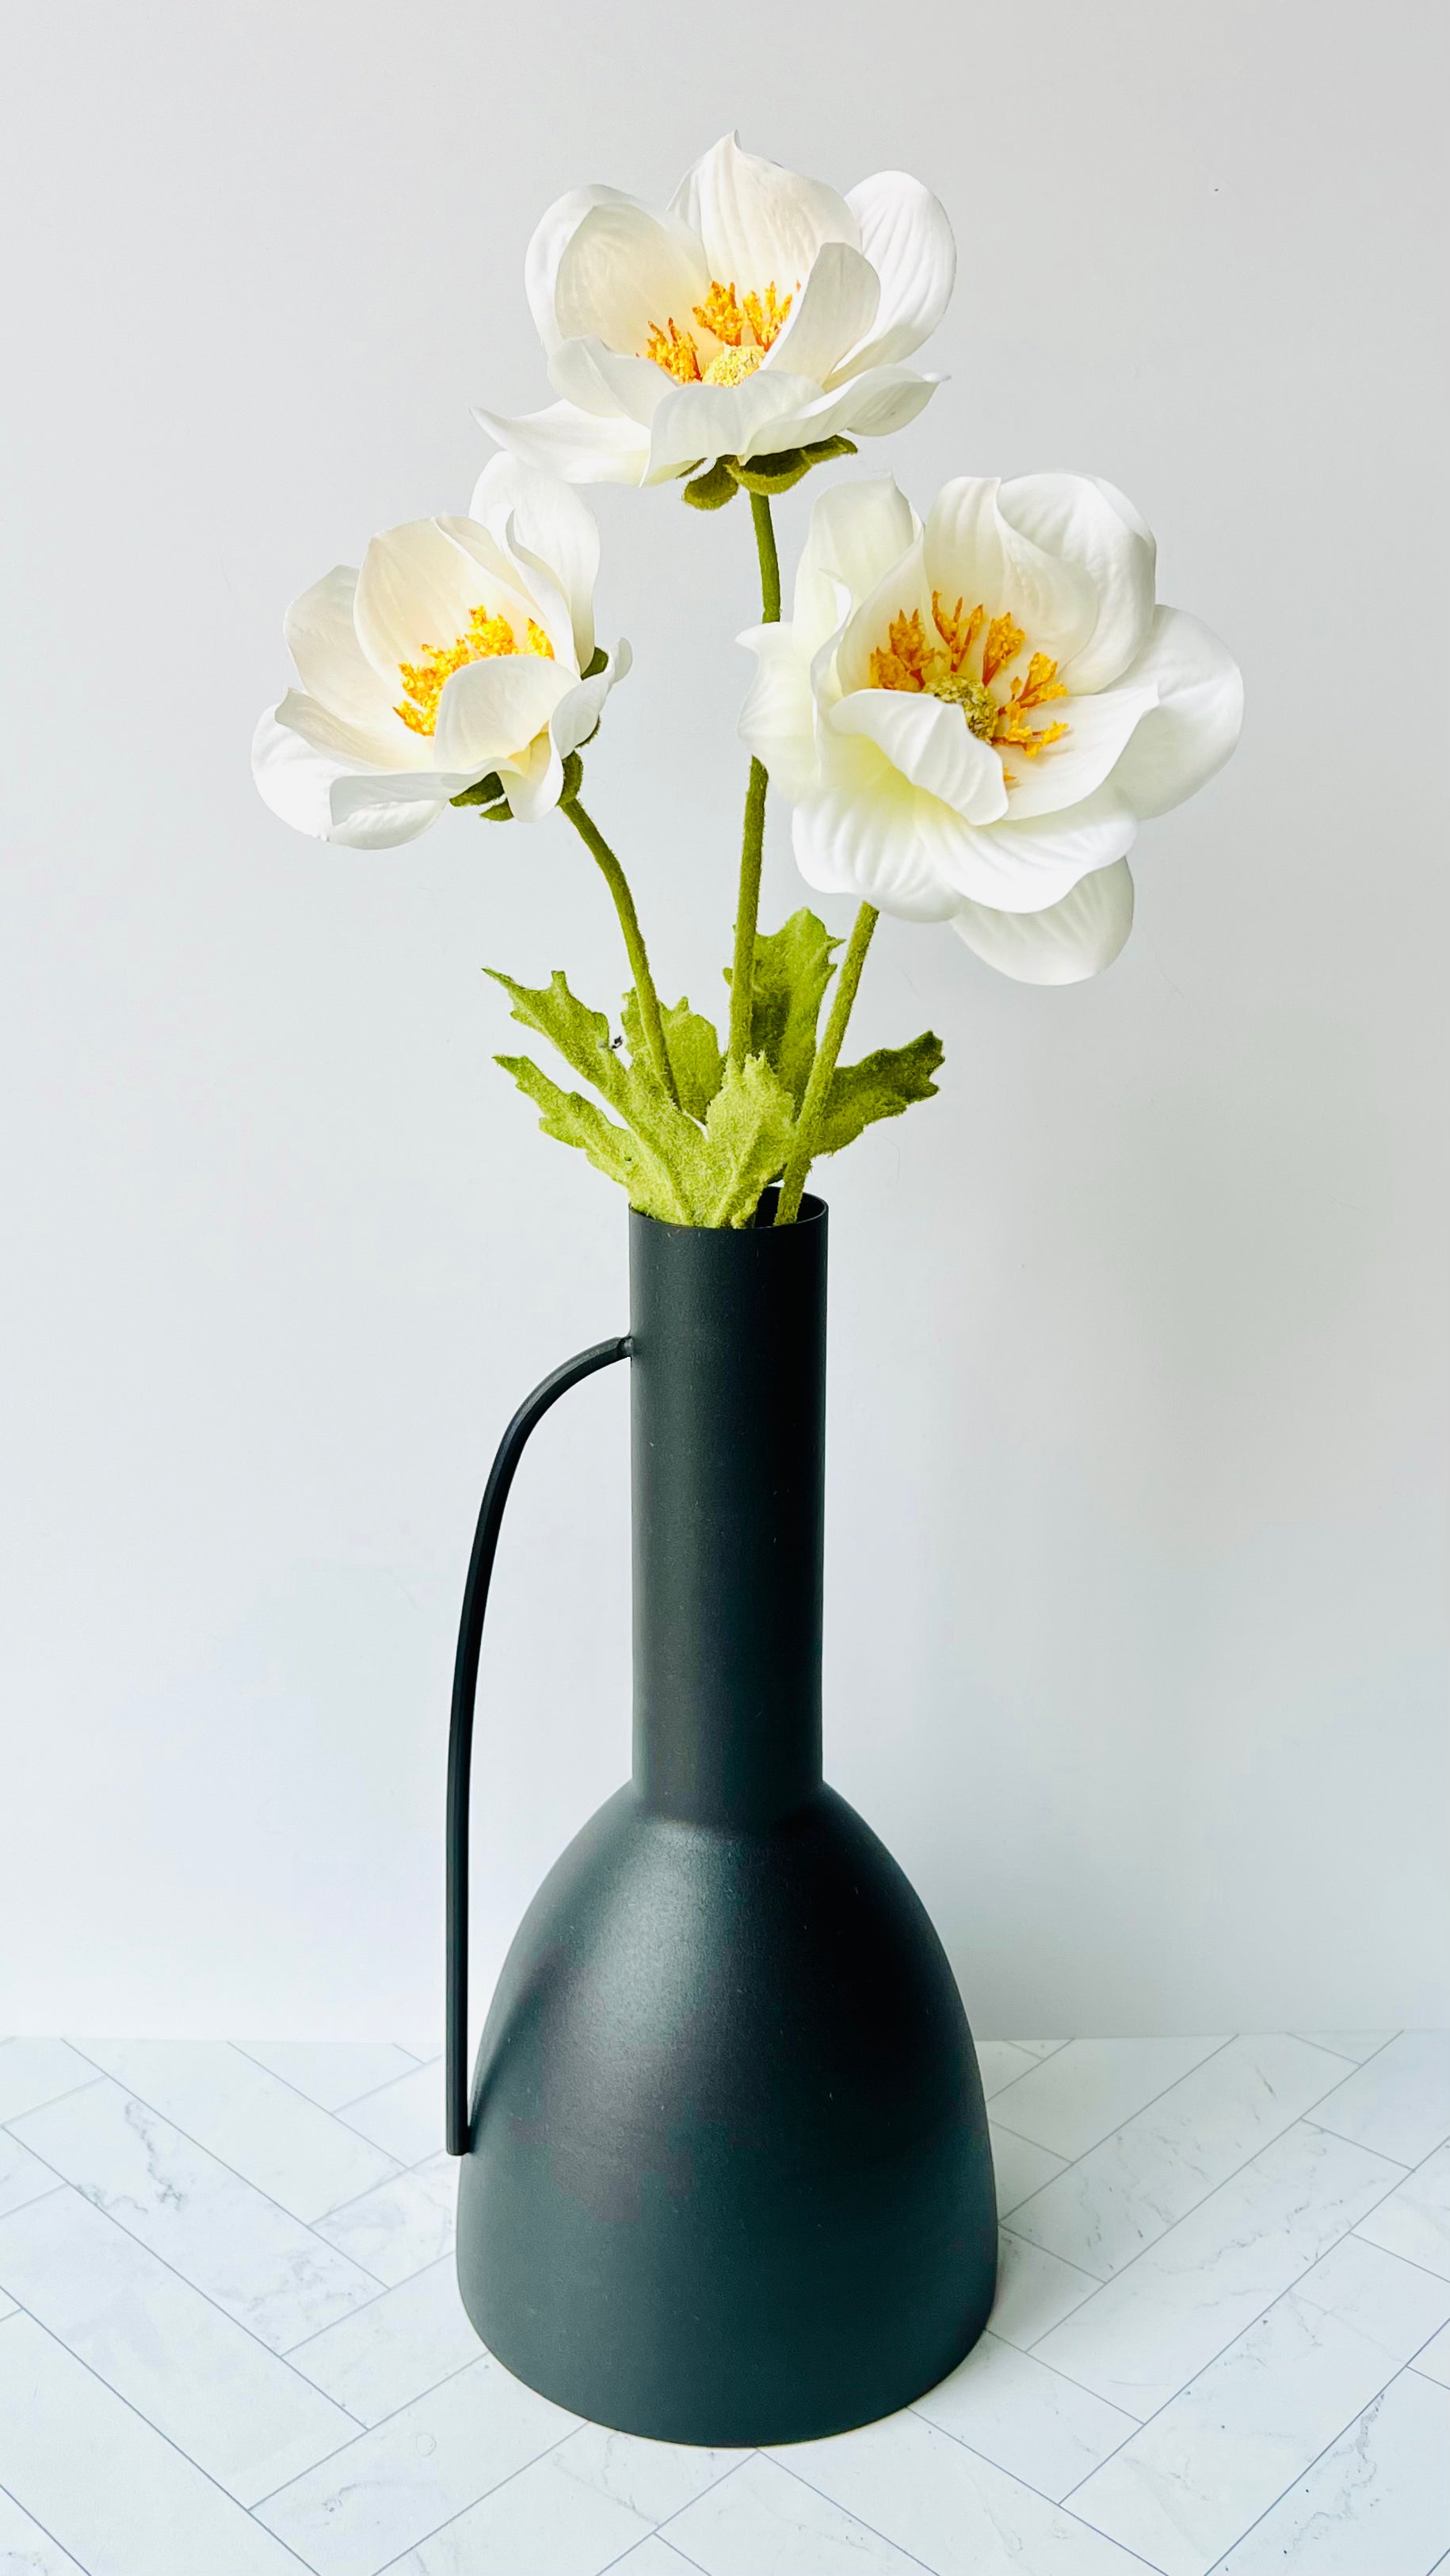 The Sleek Black Vase on a white tiled surface filled with white and yellow flowers